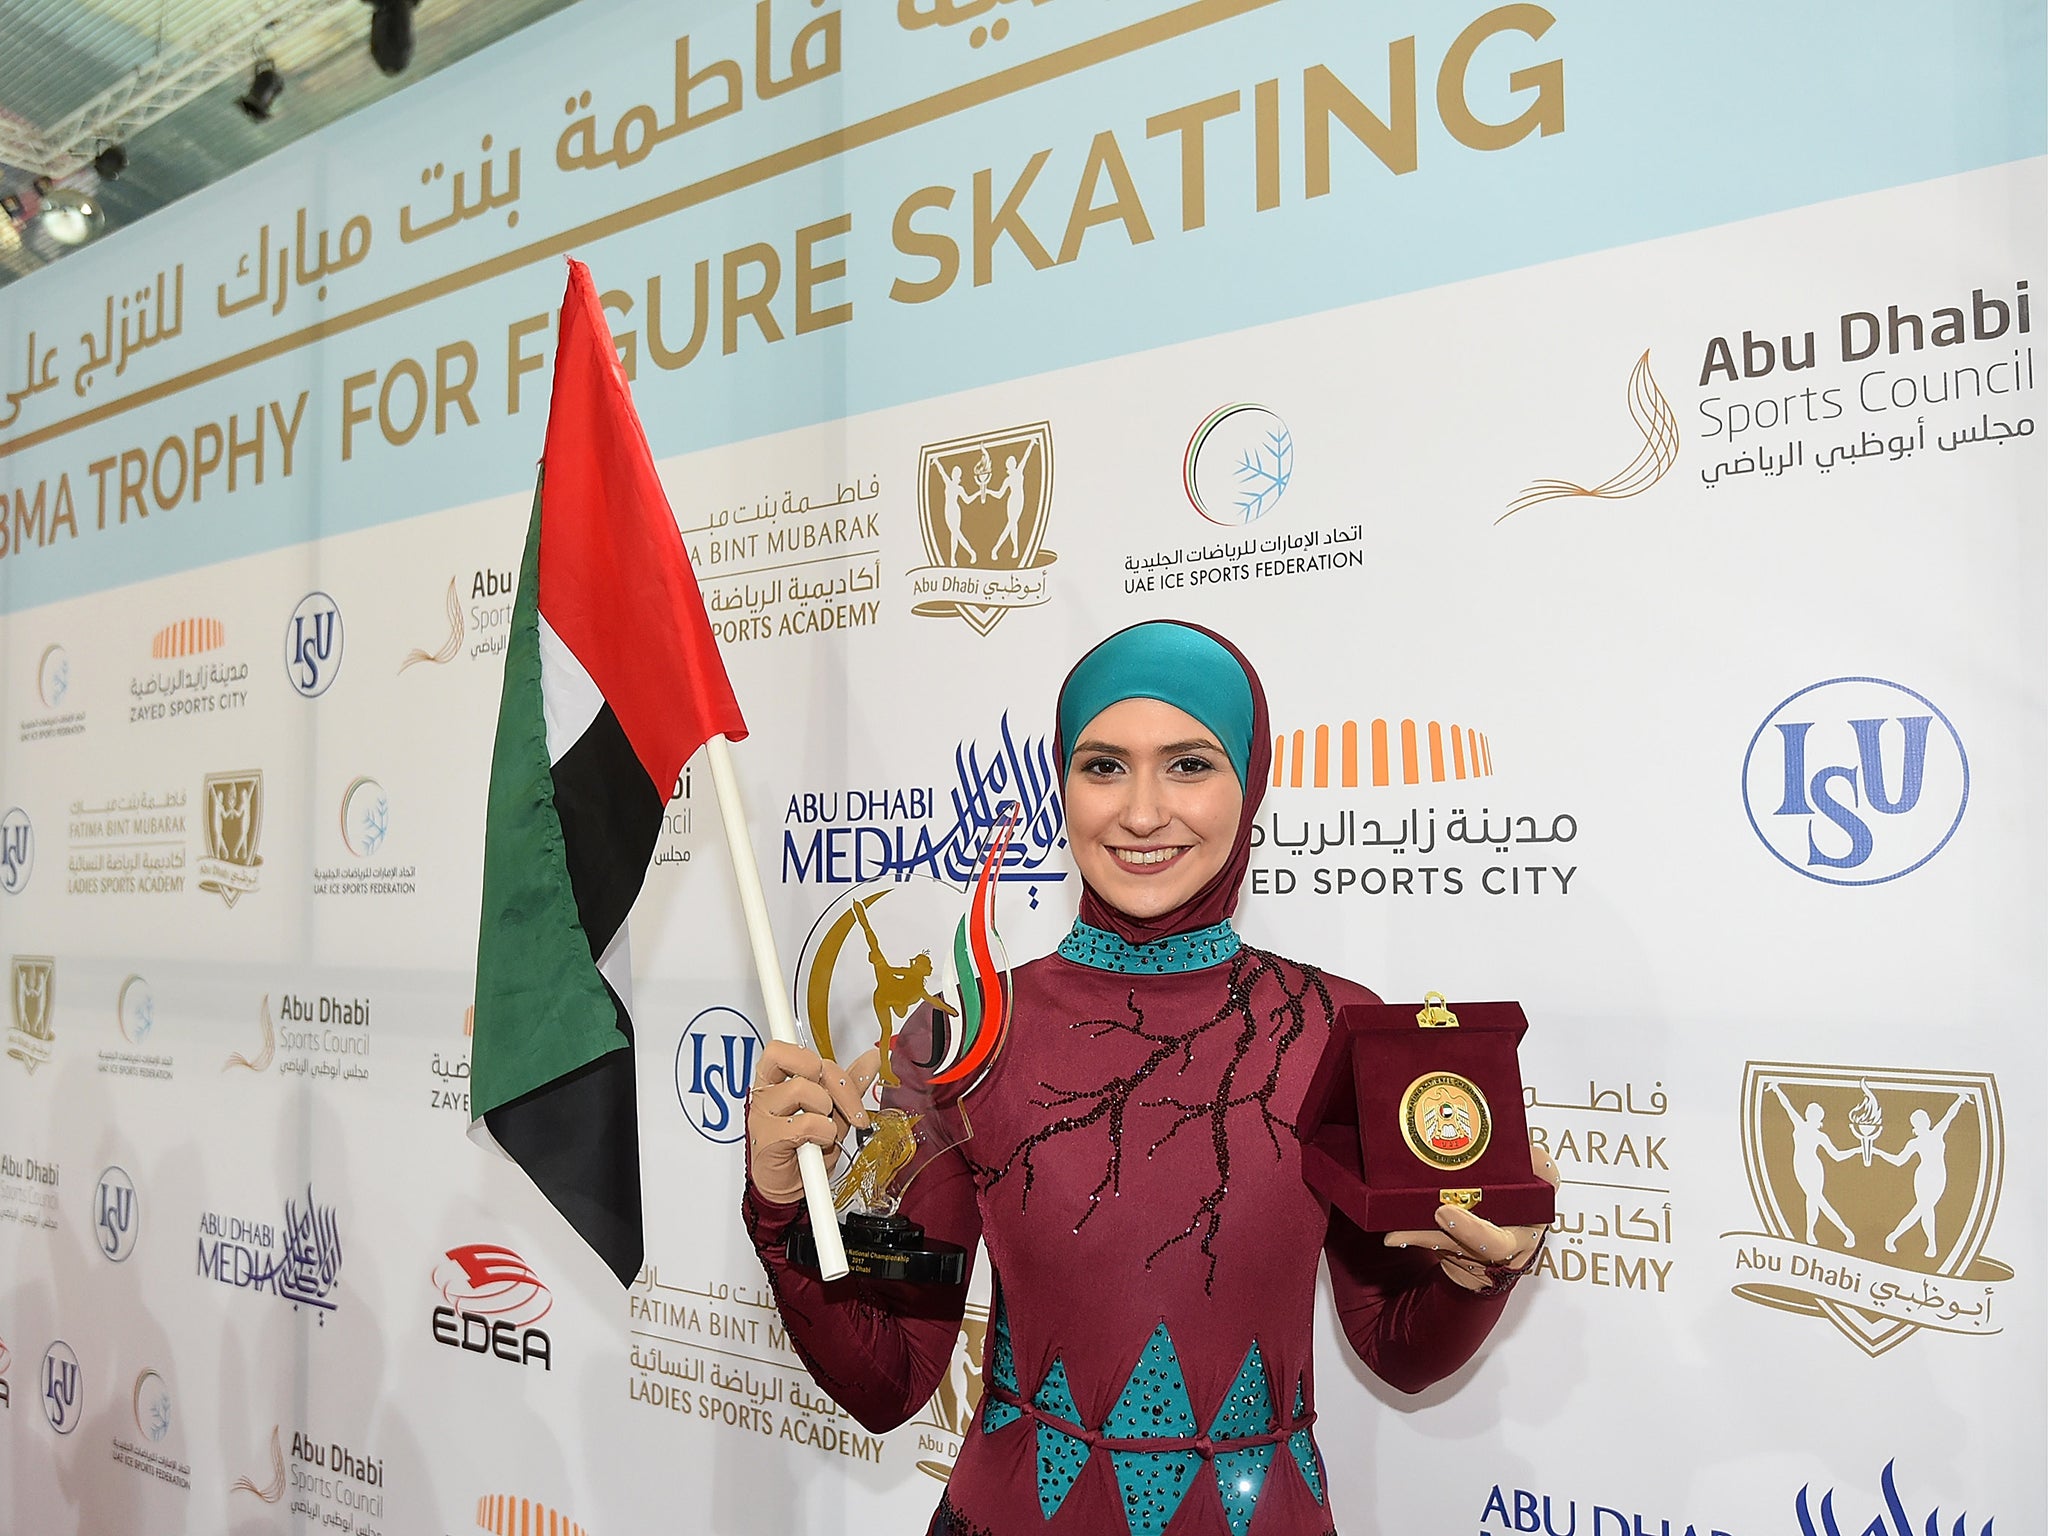 Lari wants to become the first female UAE skater to reach the Winter Olympics, Figure Skating Championship and World Champioships